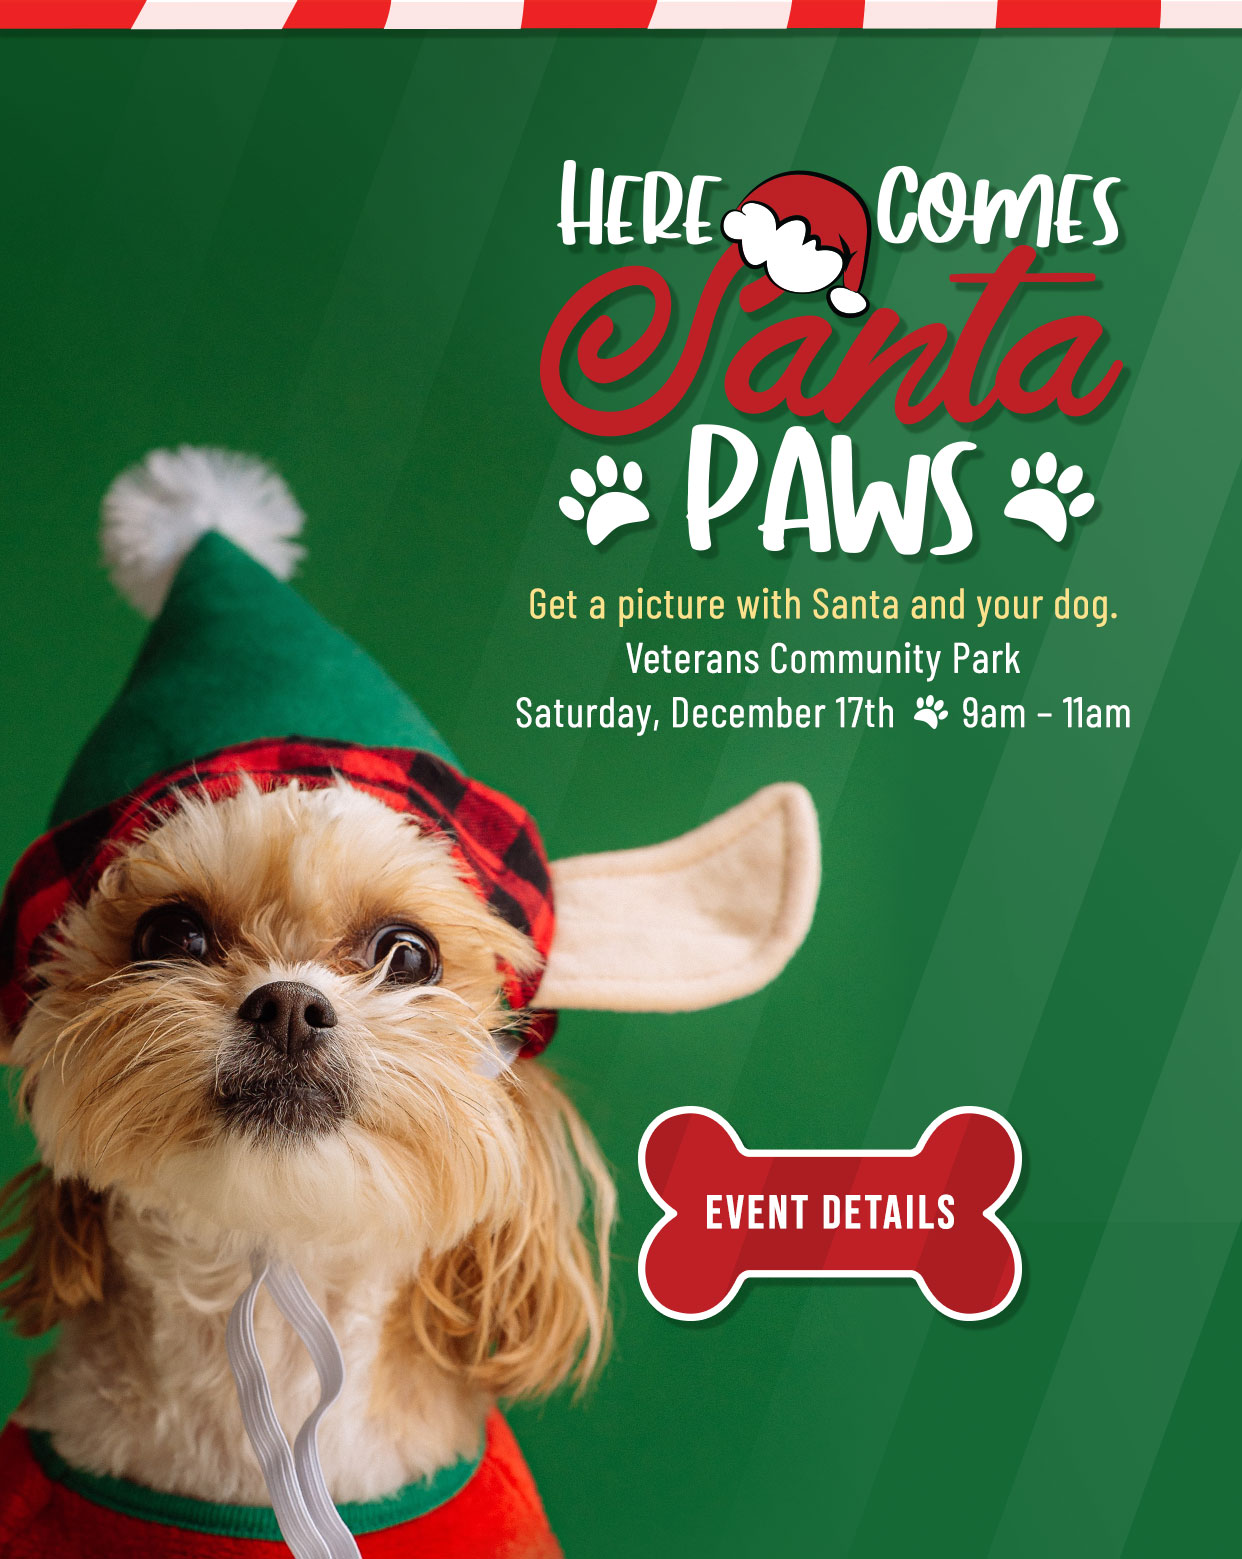 Here Comes Santa Paws, Get A Picture With Santa & Your Dog, Veteran Community Park Saturday, December 17th 9am – 11am